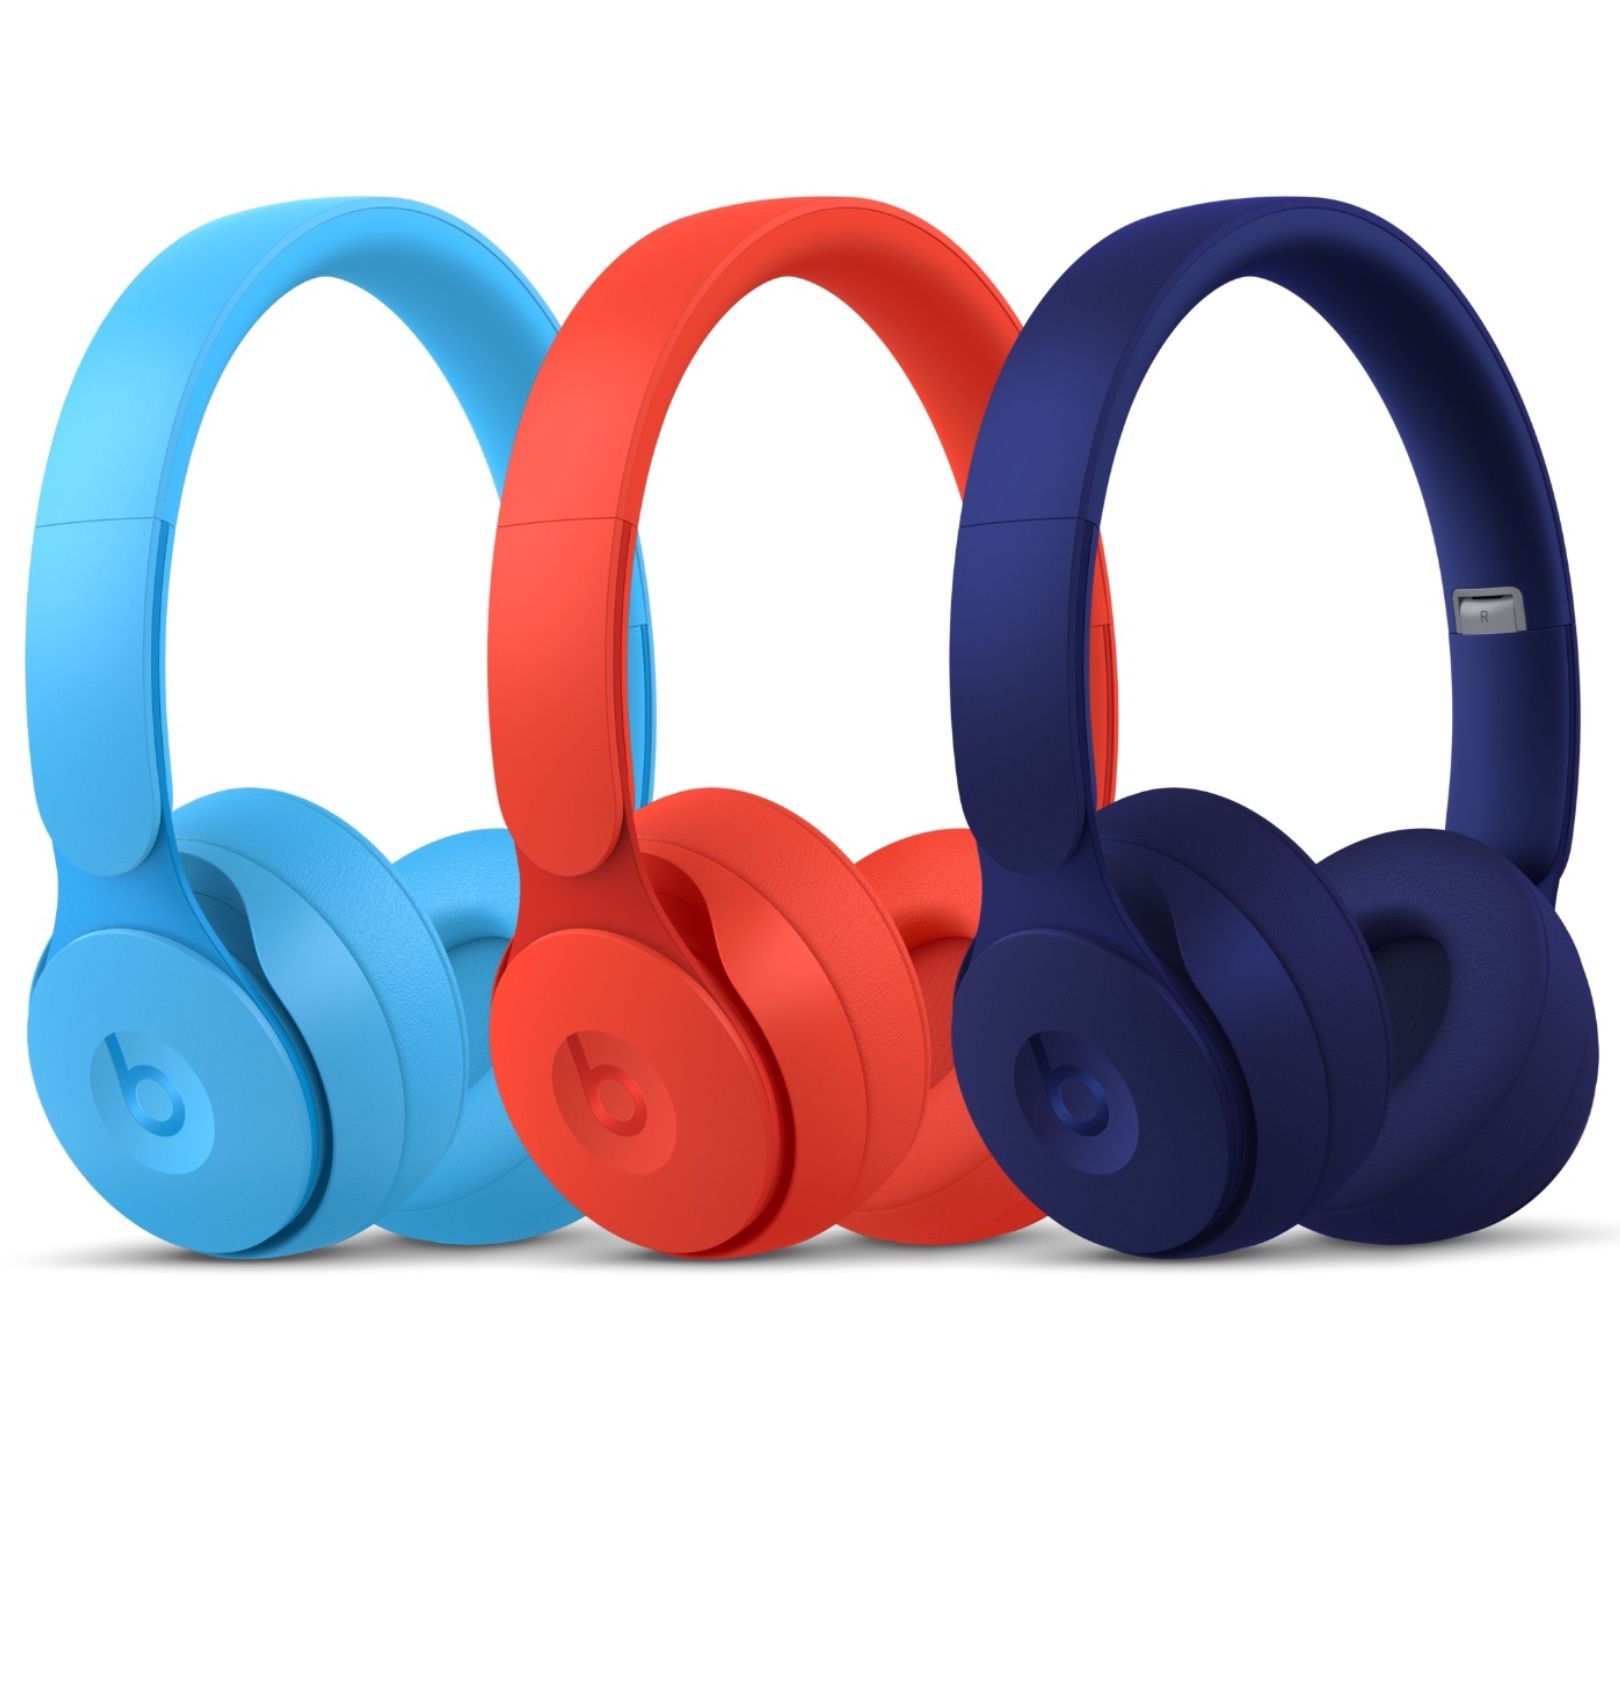 Beats Solo Pro Wireless Active Noise Cancelling On-Ear Headphones 🎧🎧 In Retail BOX 📦 